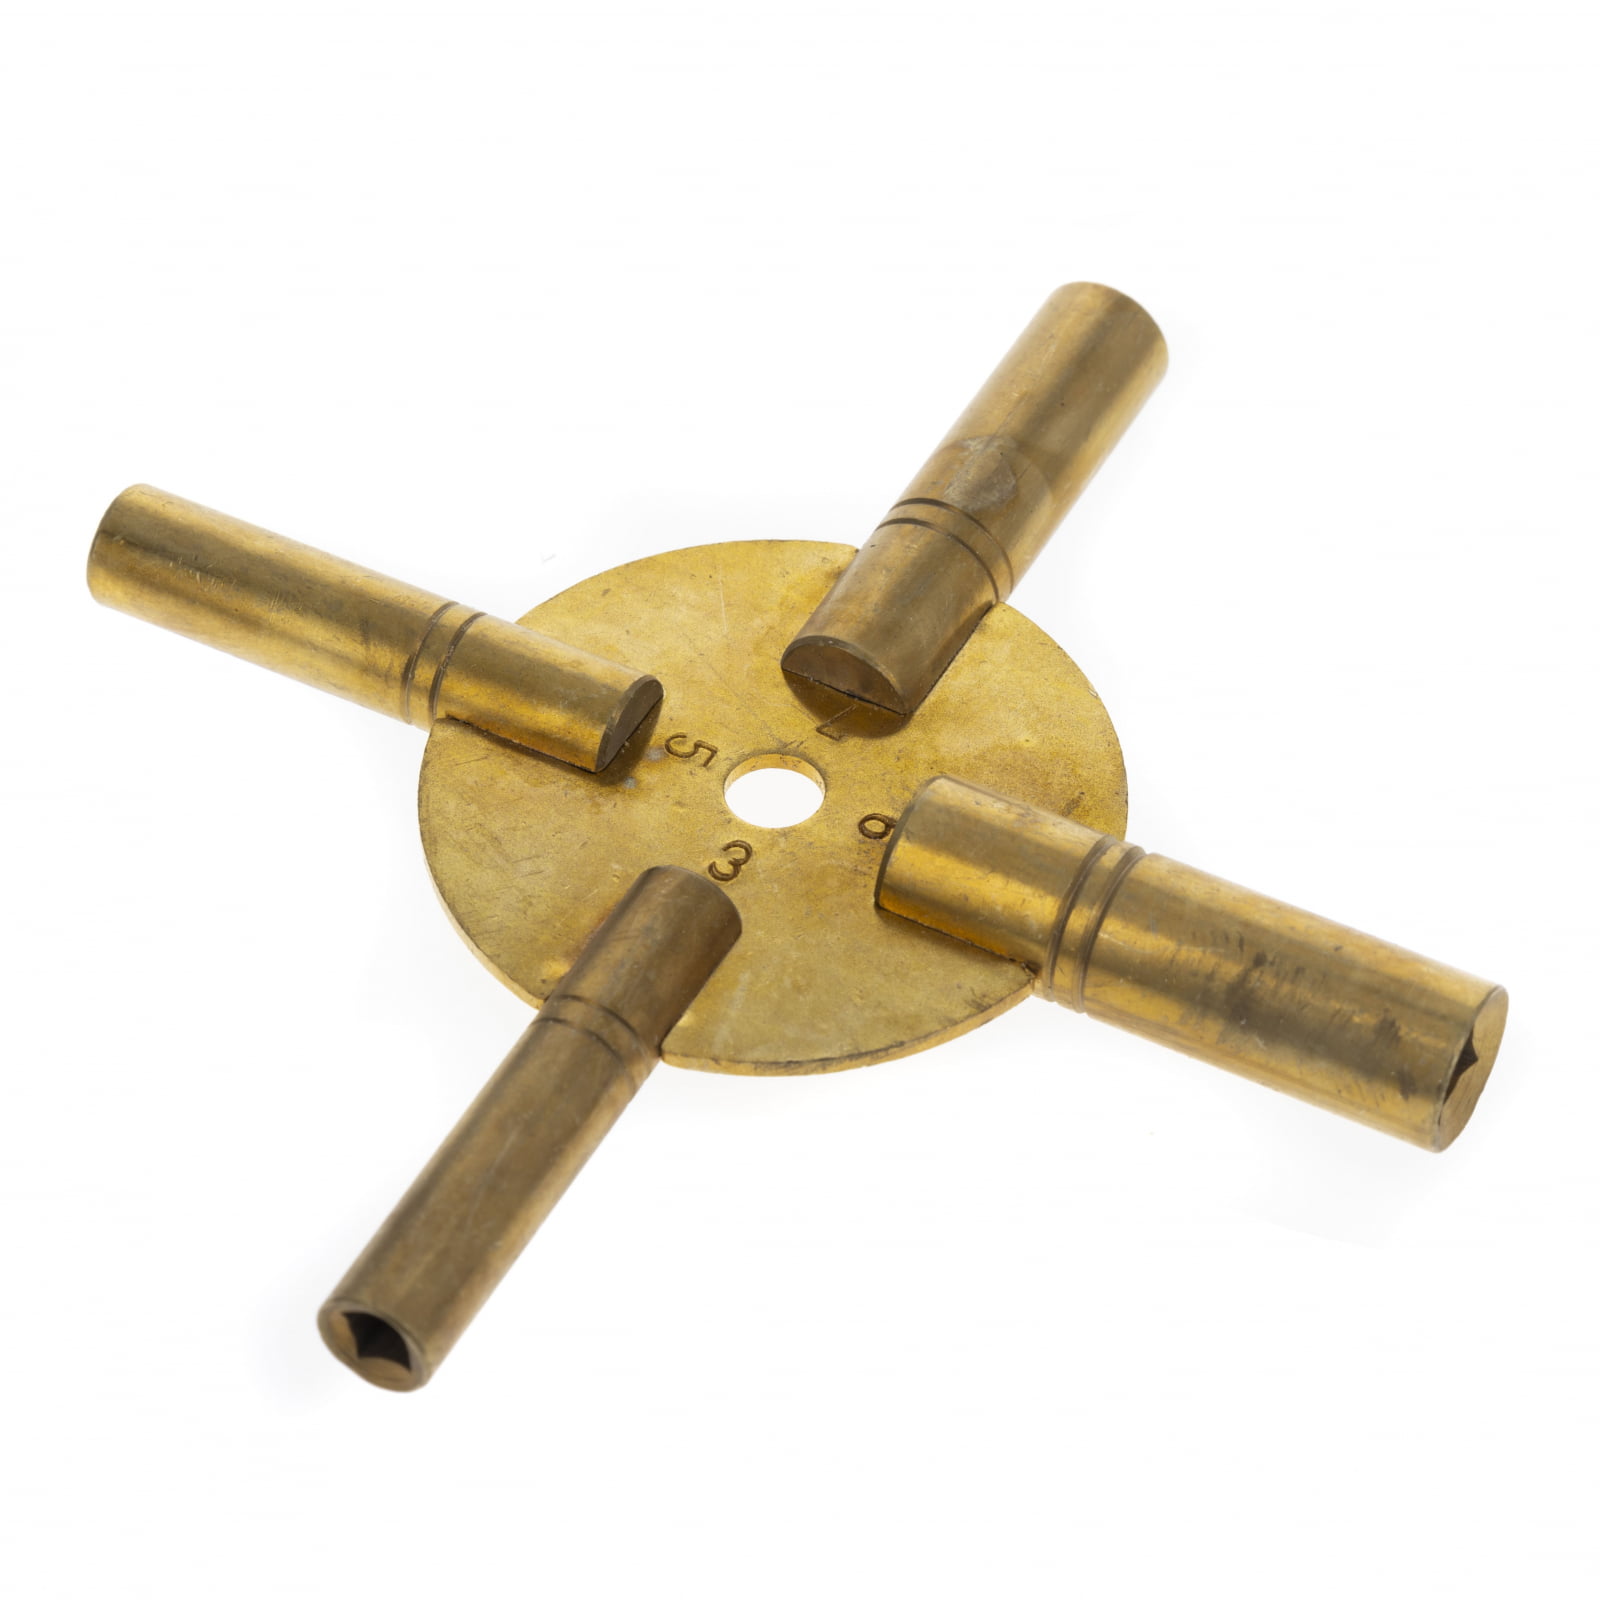 New Brass Universal Clock Key for Winding Clocks 5 Prong Even & ODD Numbers from 